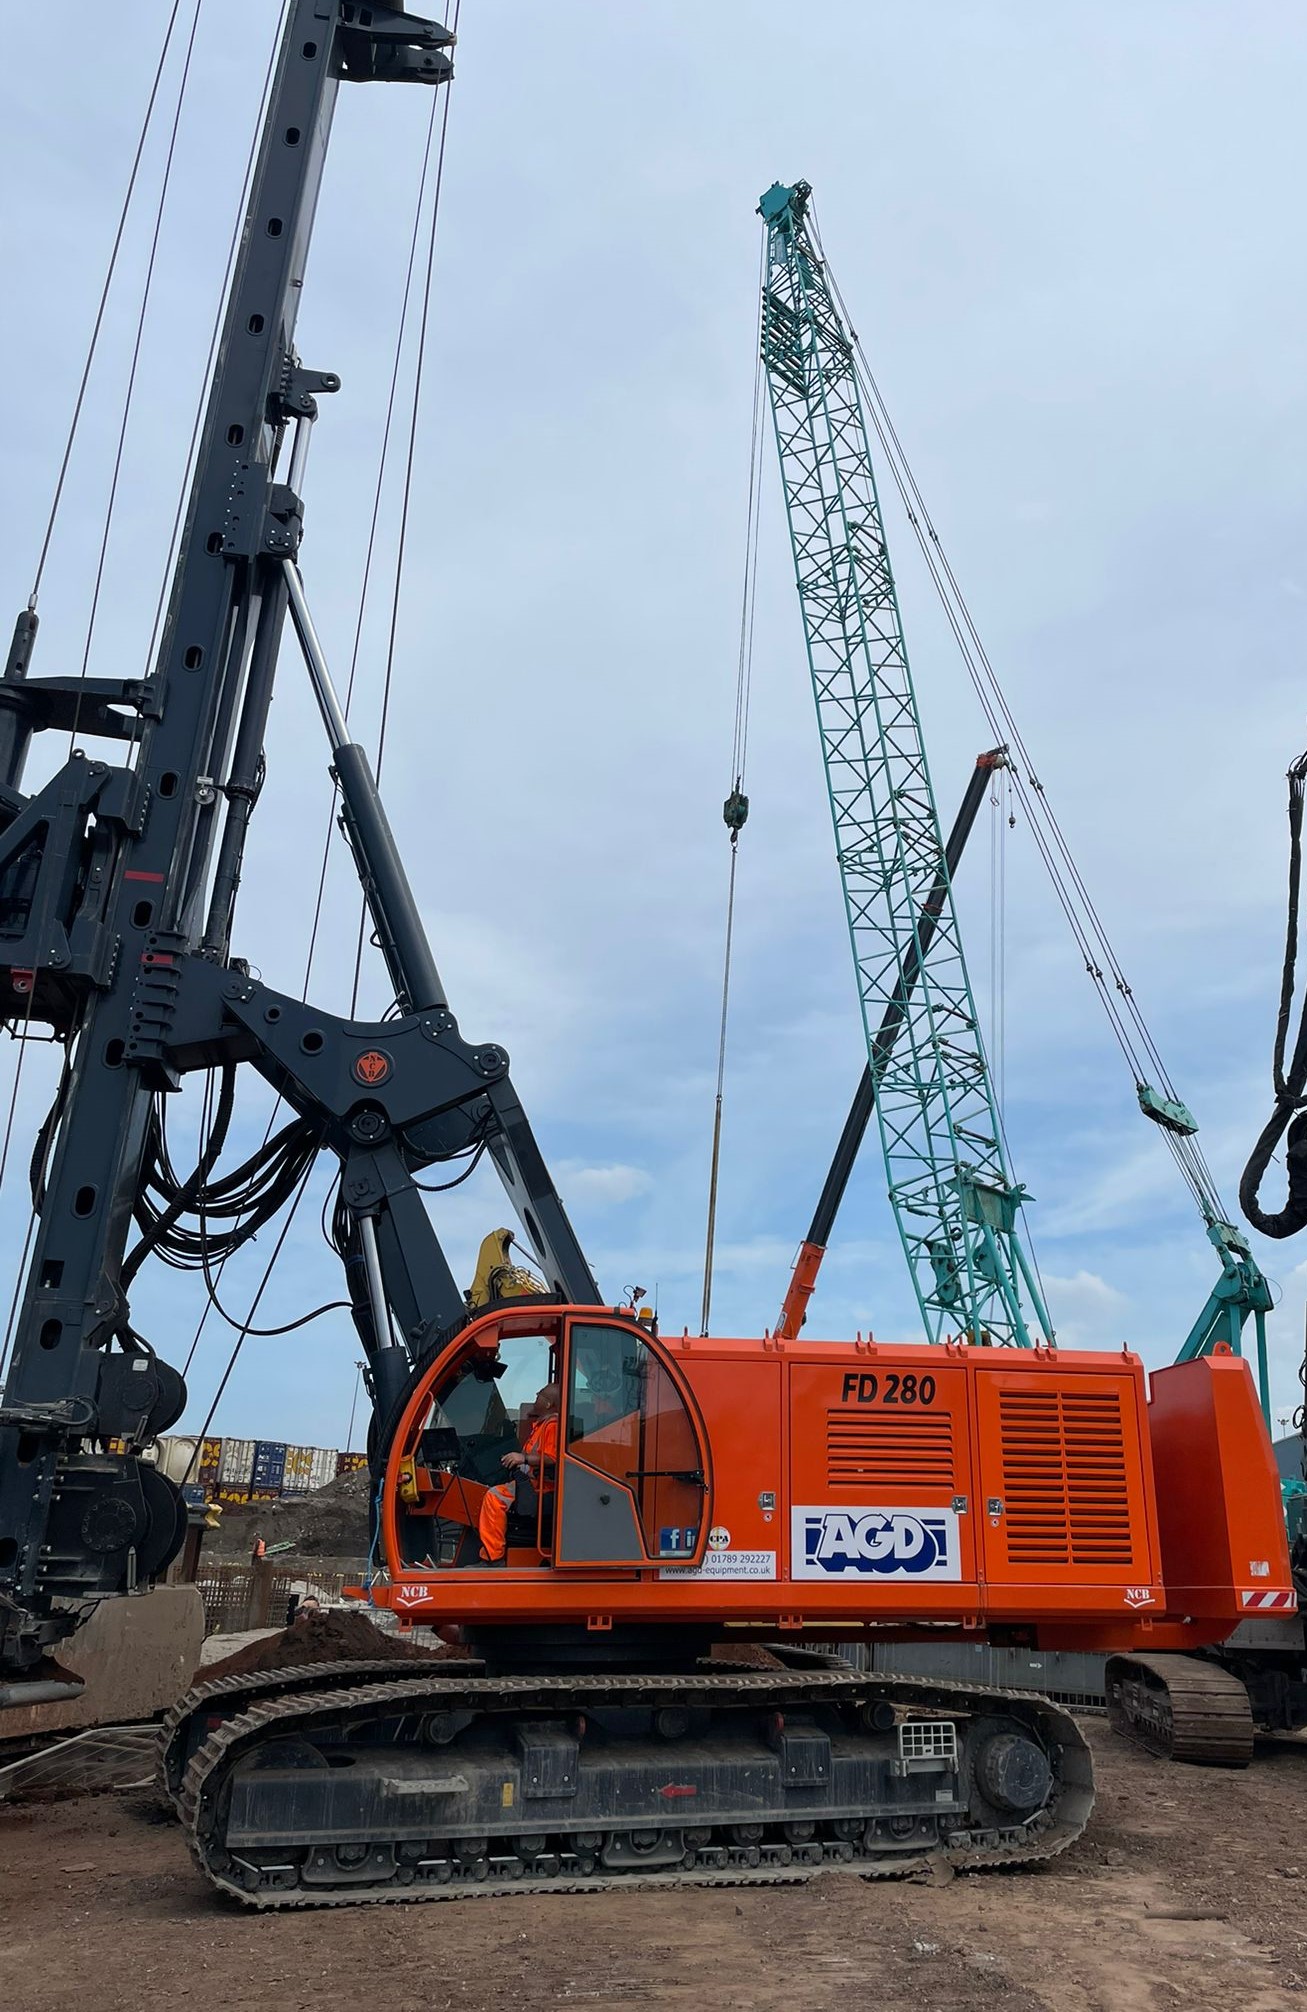 UK Providers of UK Pioneer In Rotary Piling Rig Hire